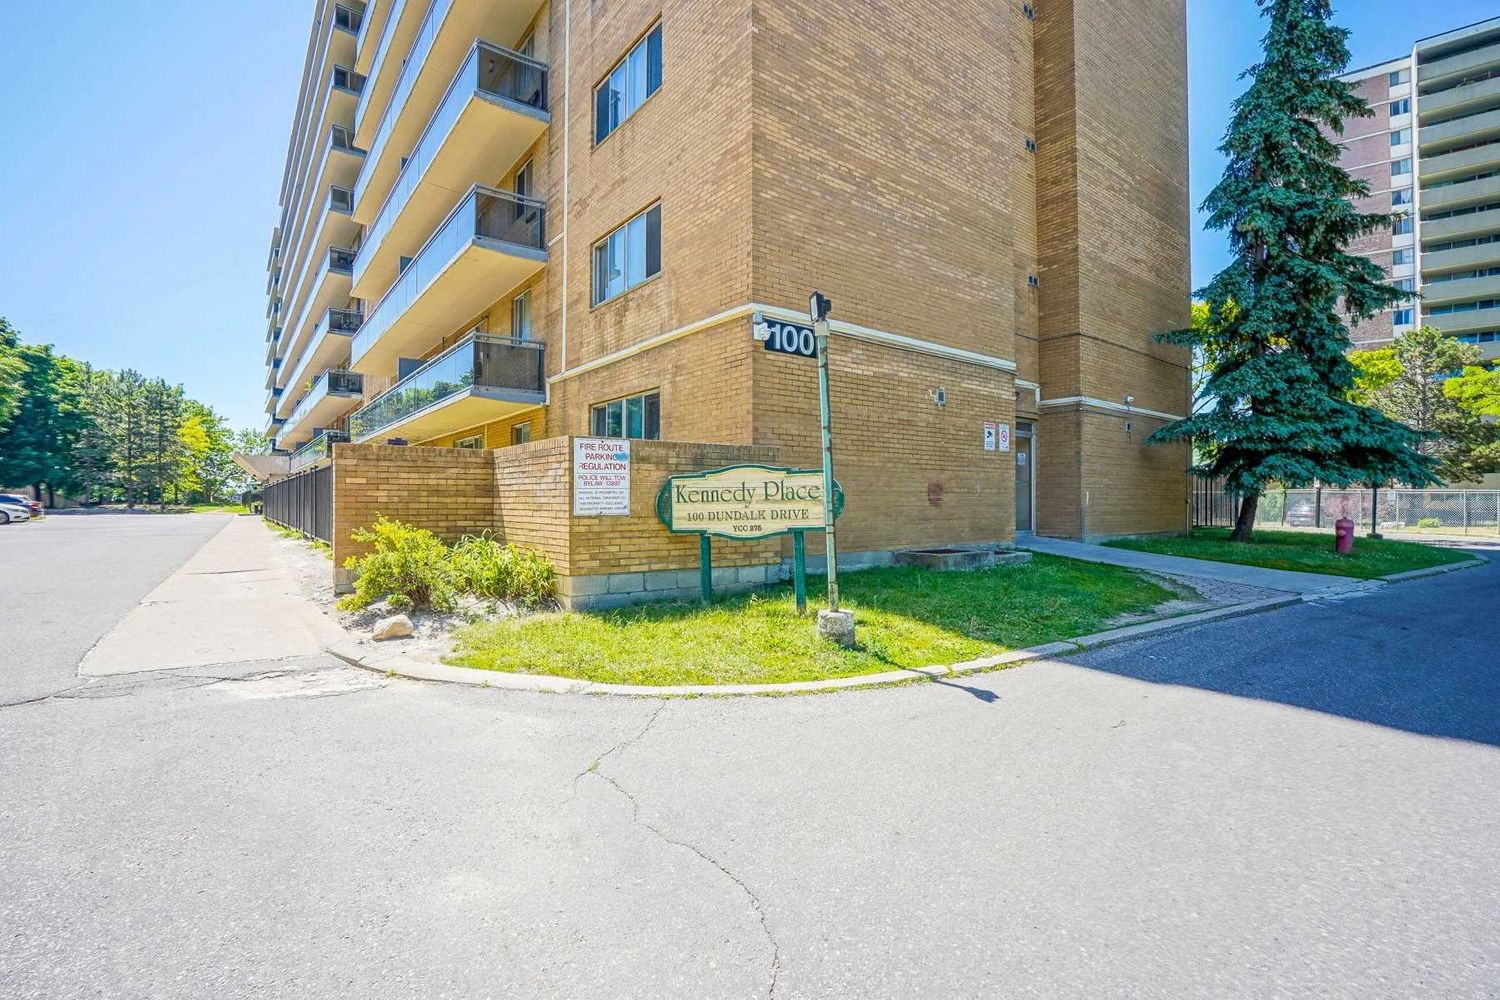 100 Dundalk Drive. Kennedy Place Condos is located in  Scarborough, Toronto - image #3 of 3